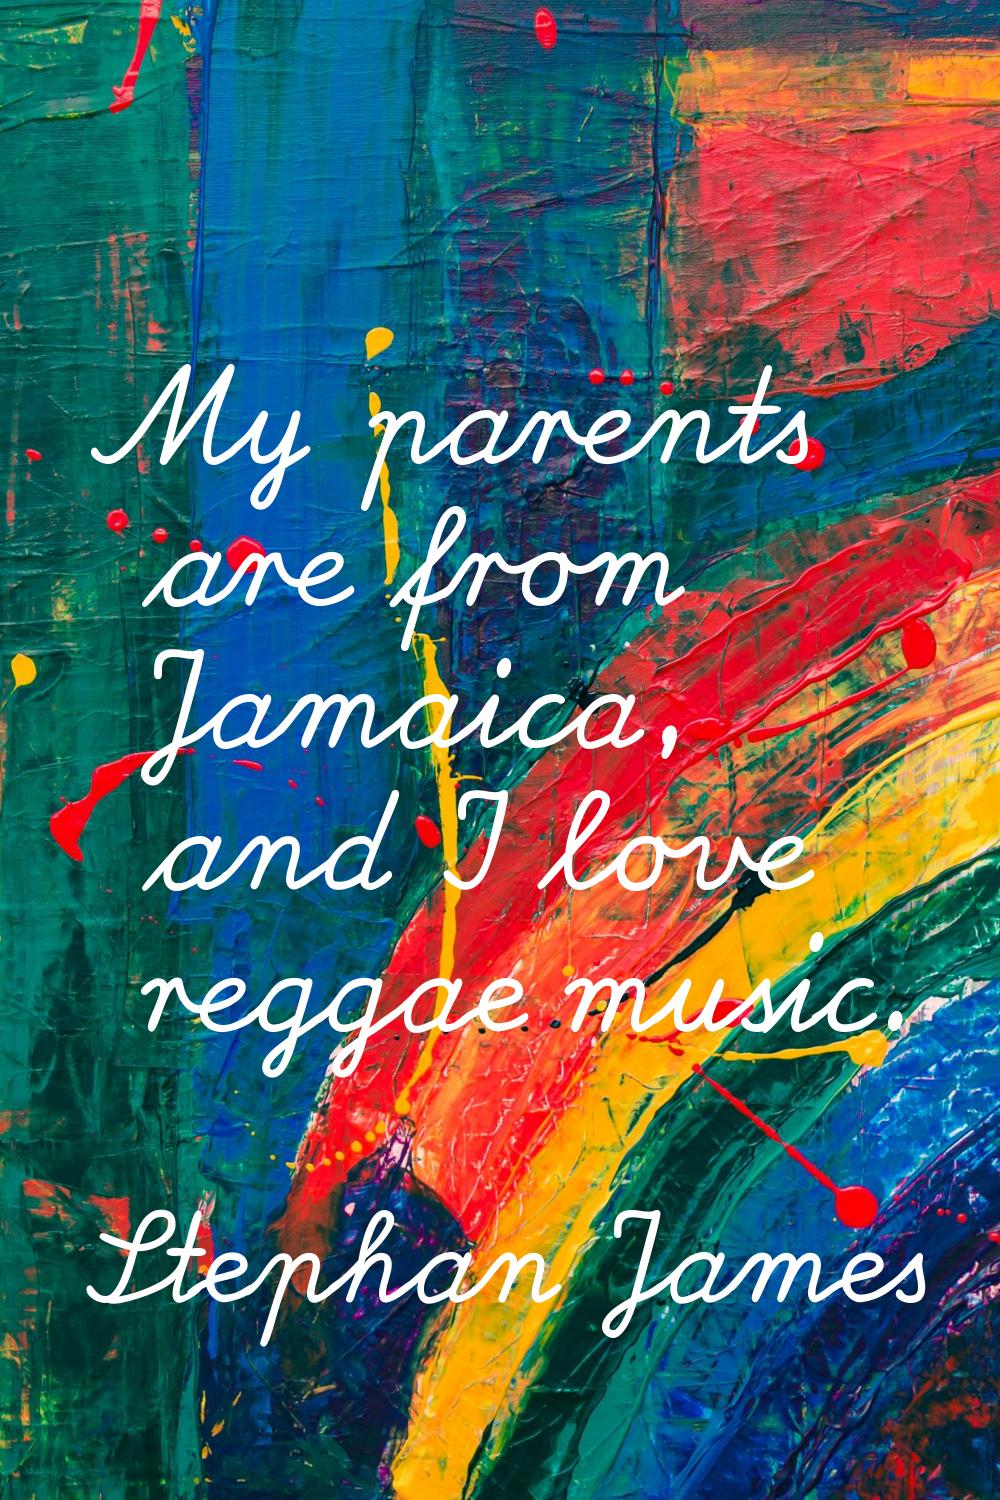 My parents are from Jamaica, and I love reggae music.